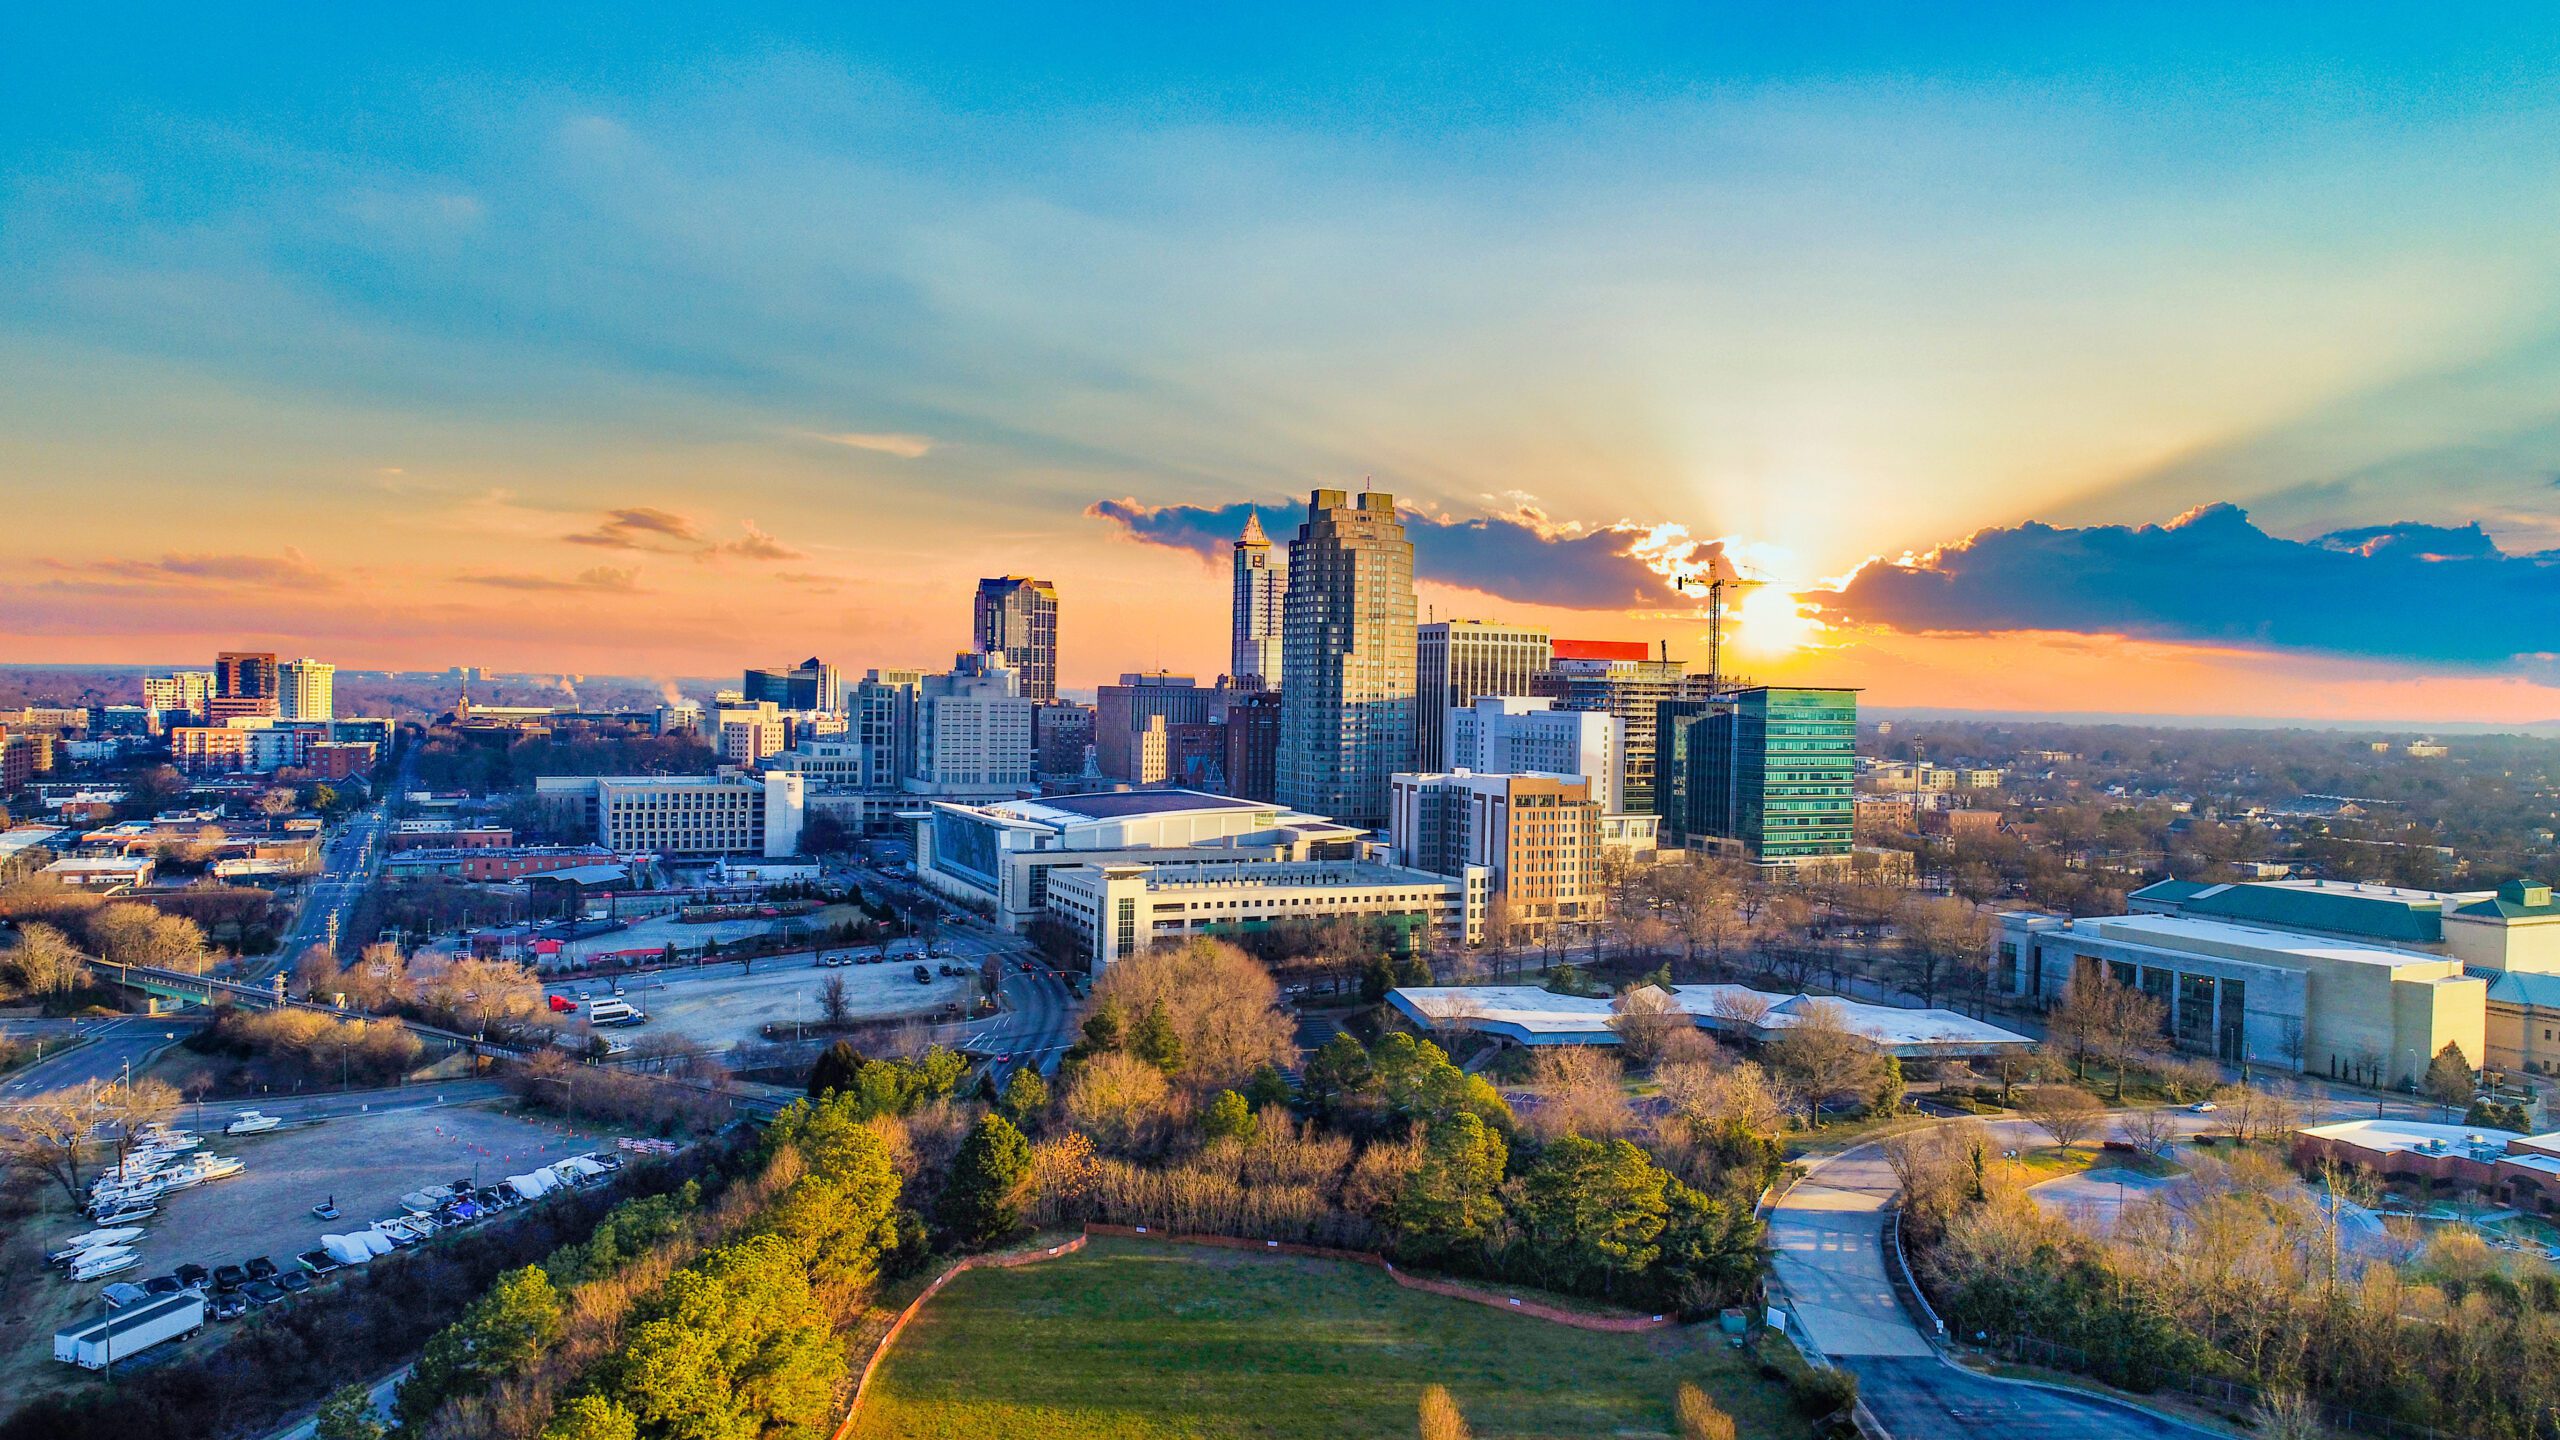 Stock image of downtown Raleigh, NC